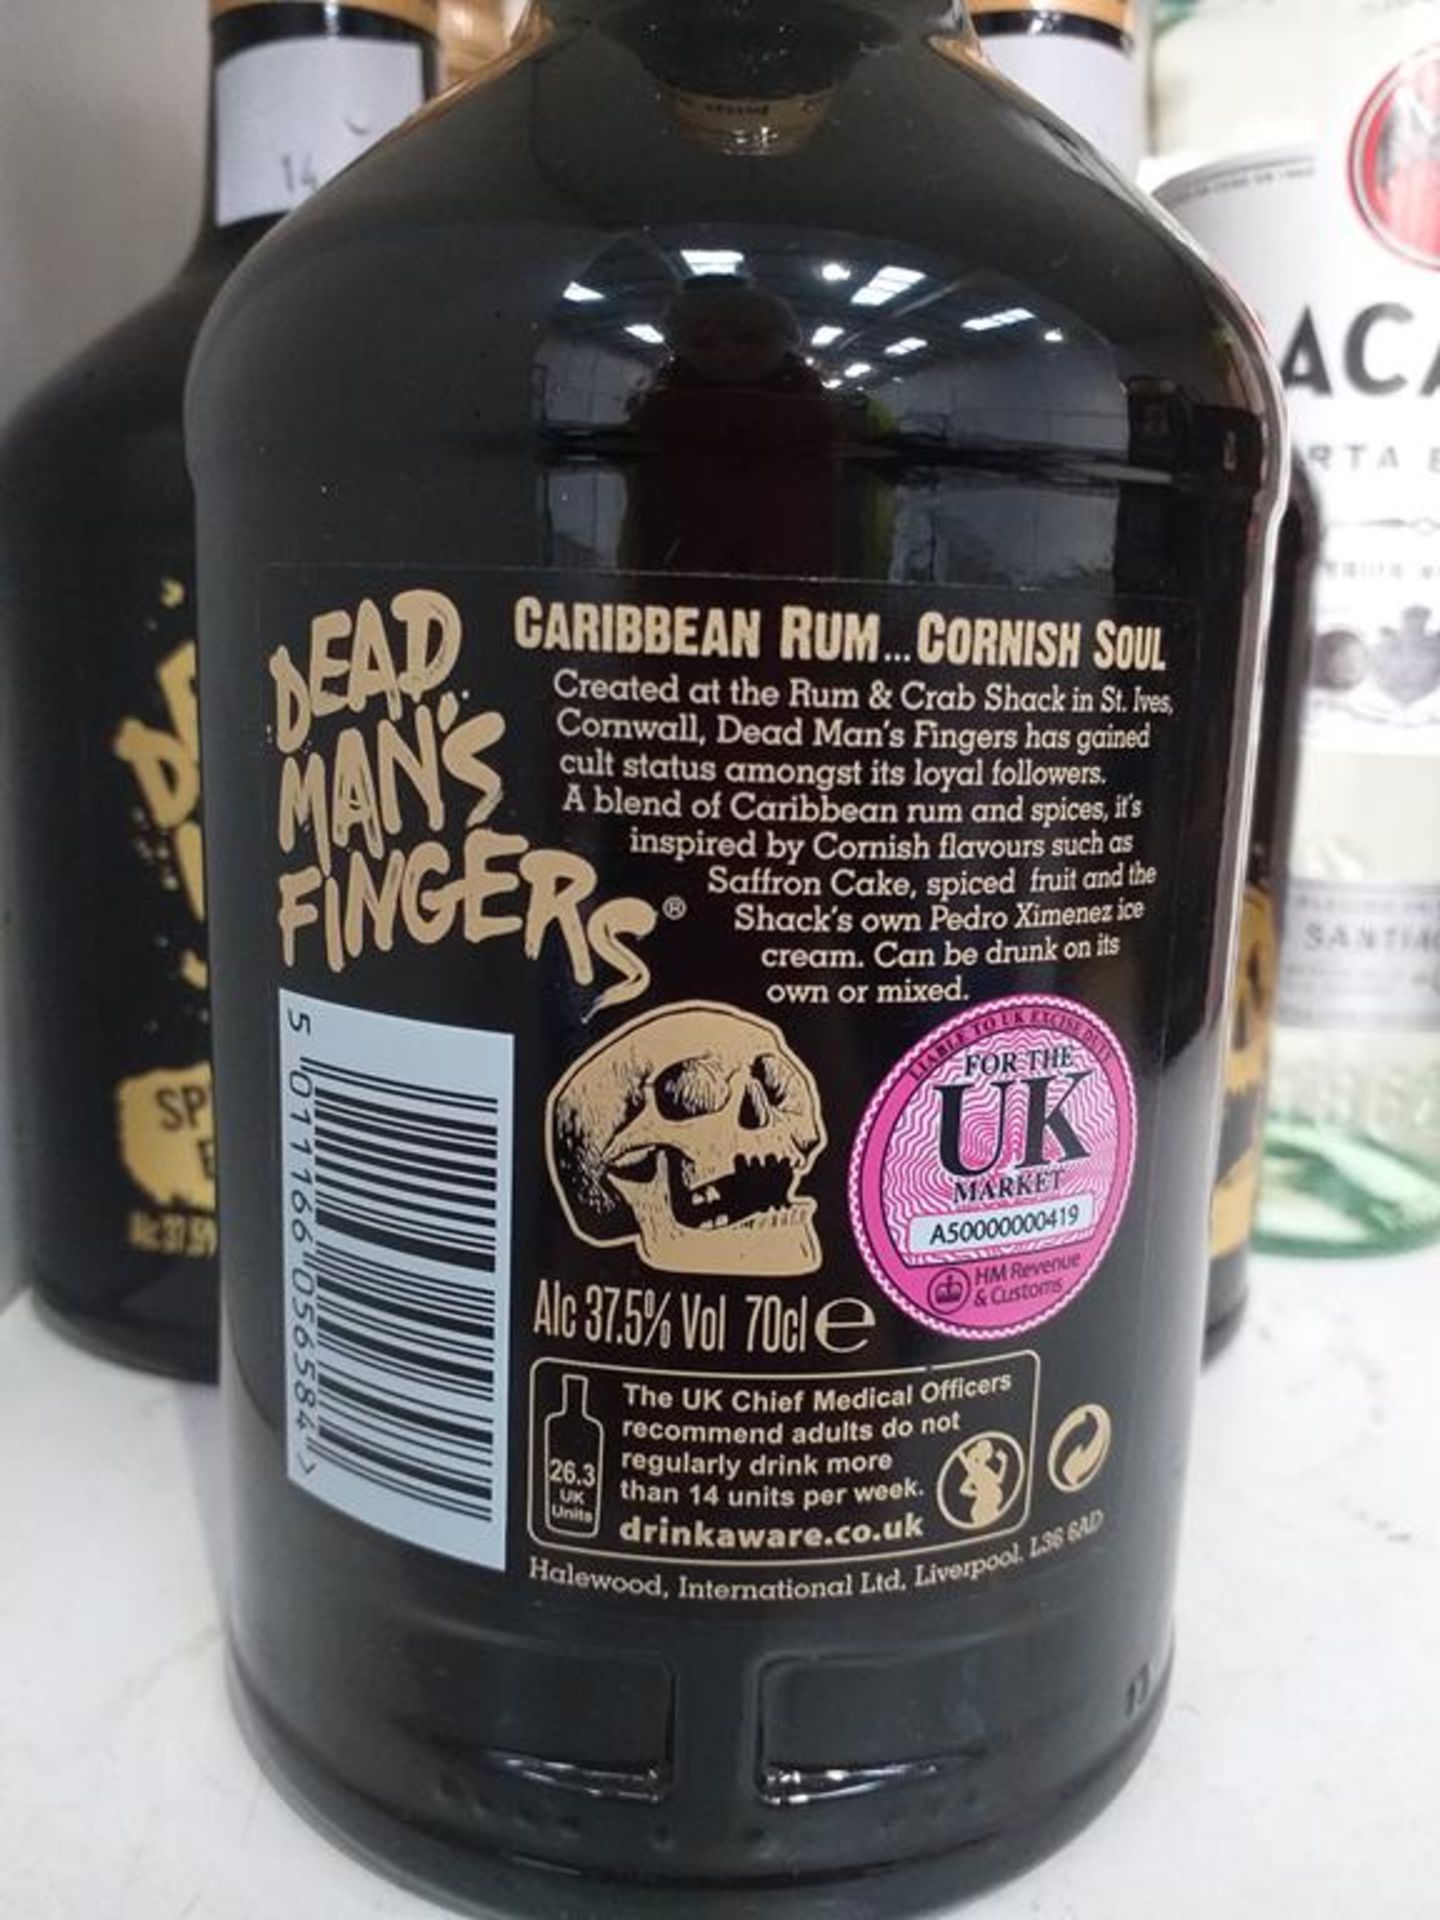 Five bottles of Dead Man's Fingers Spice Rum and a bottle of Bacardi Carta Blanca white rum - Image 3 of 5